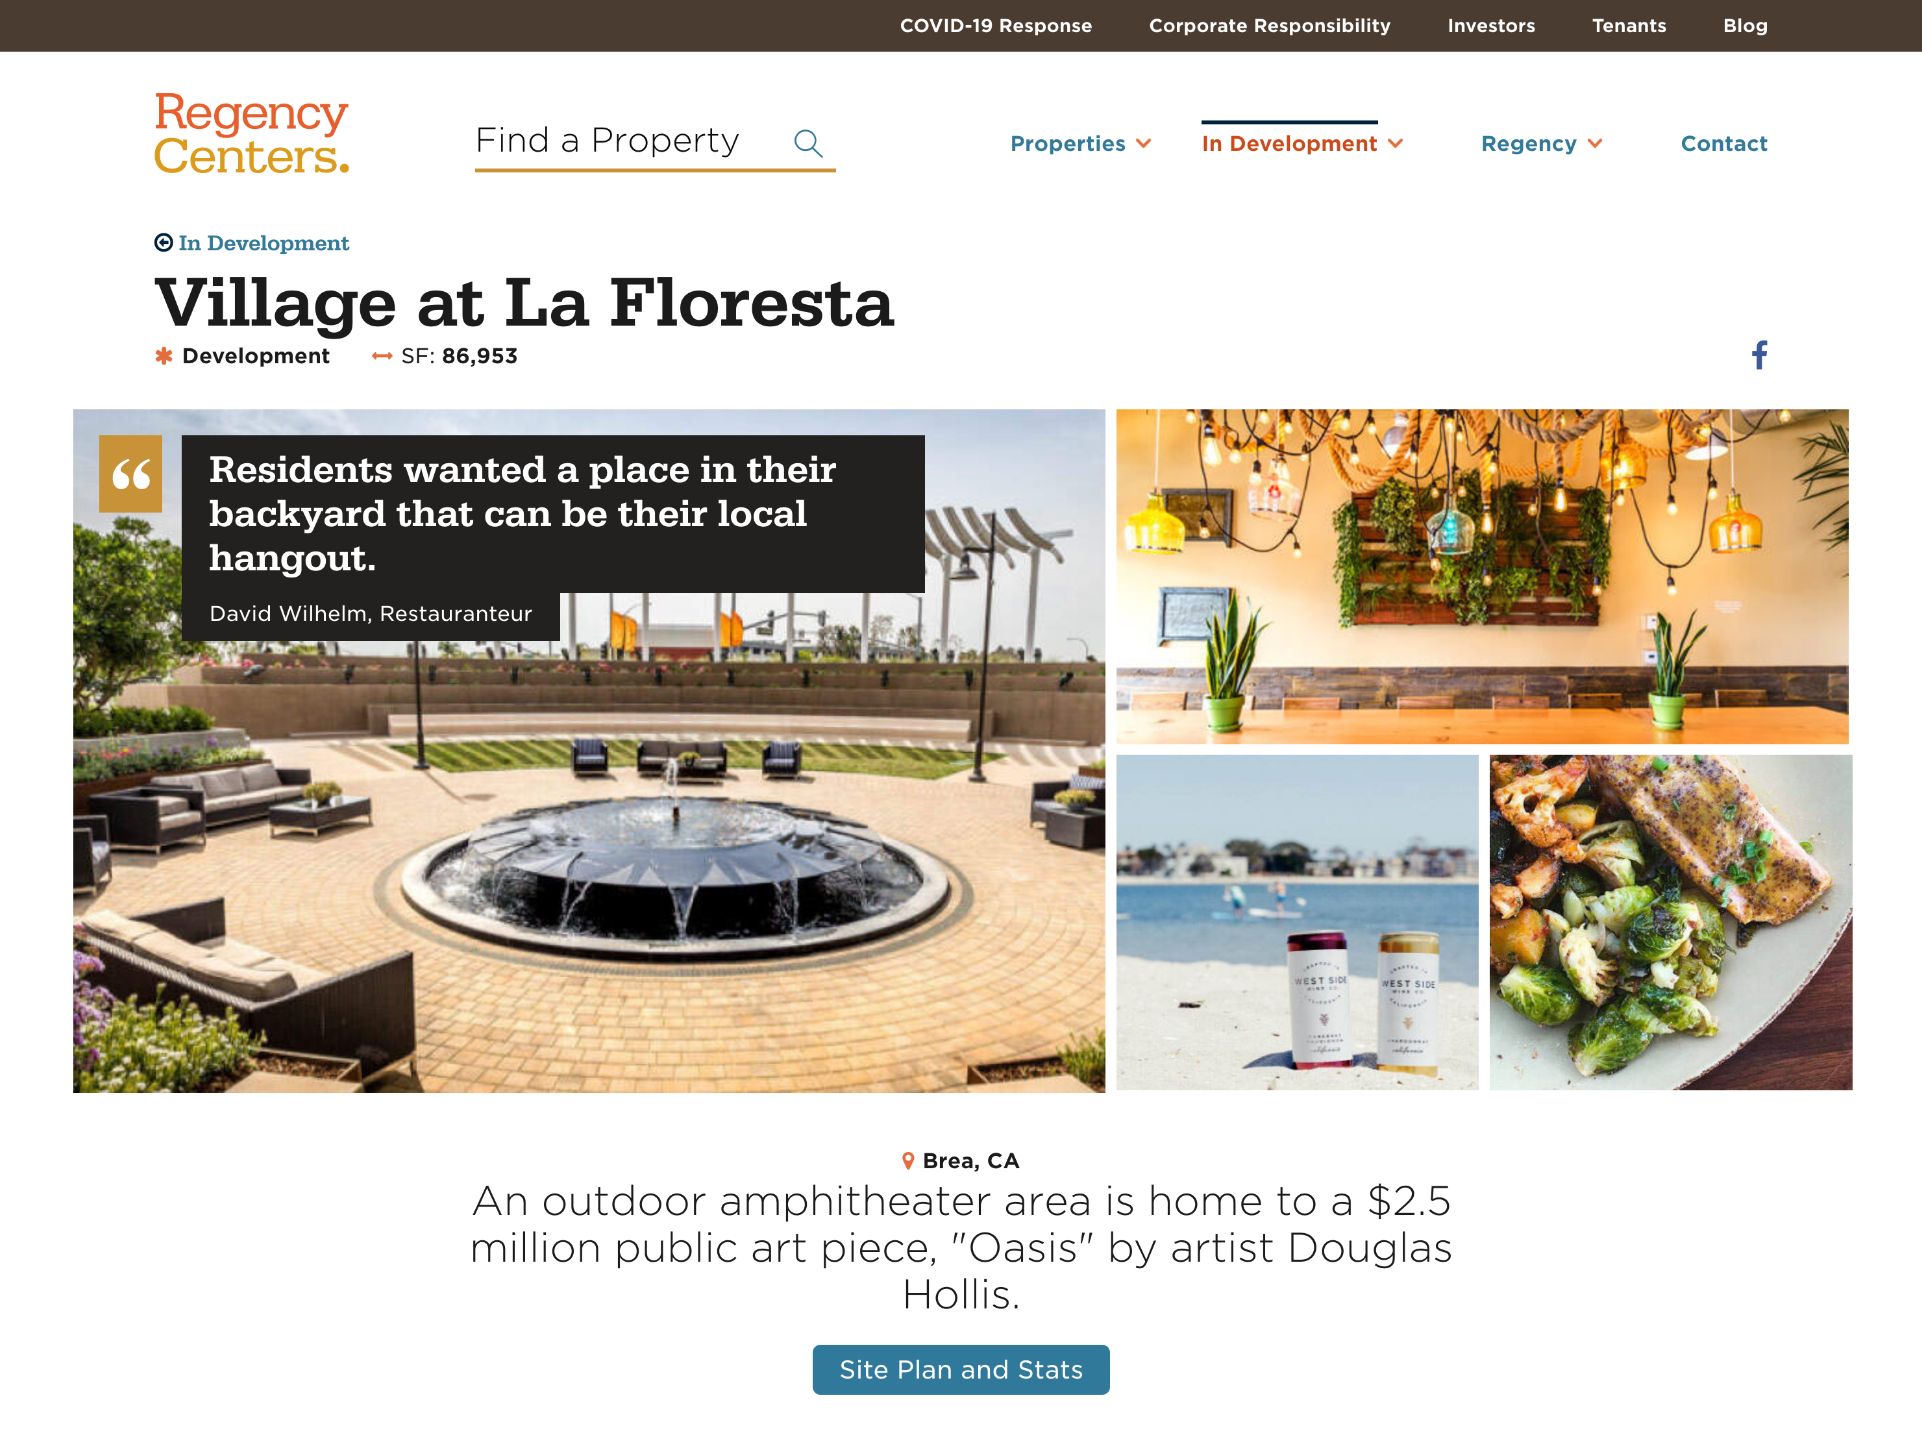 Detail view of property page showing the Village at La Floresta.